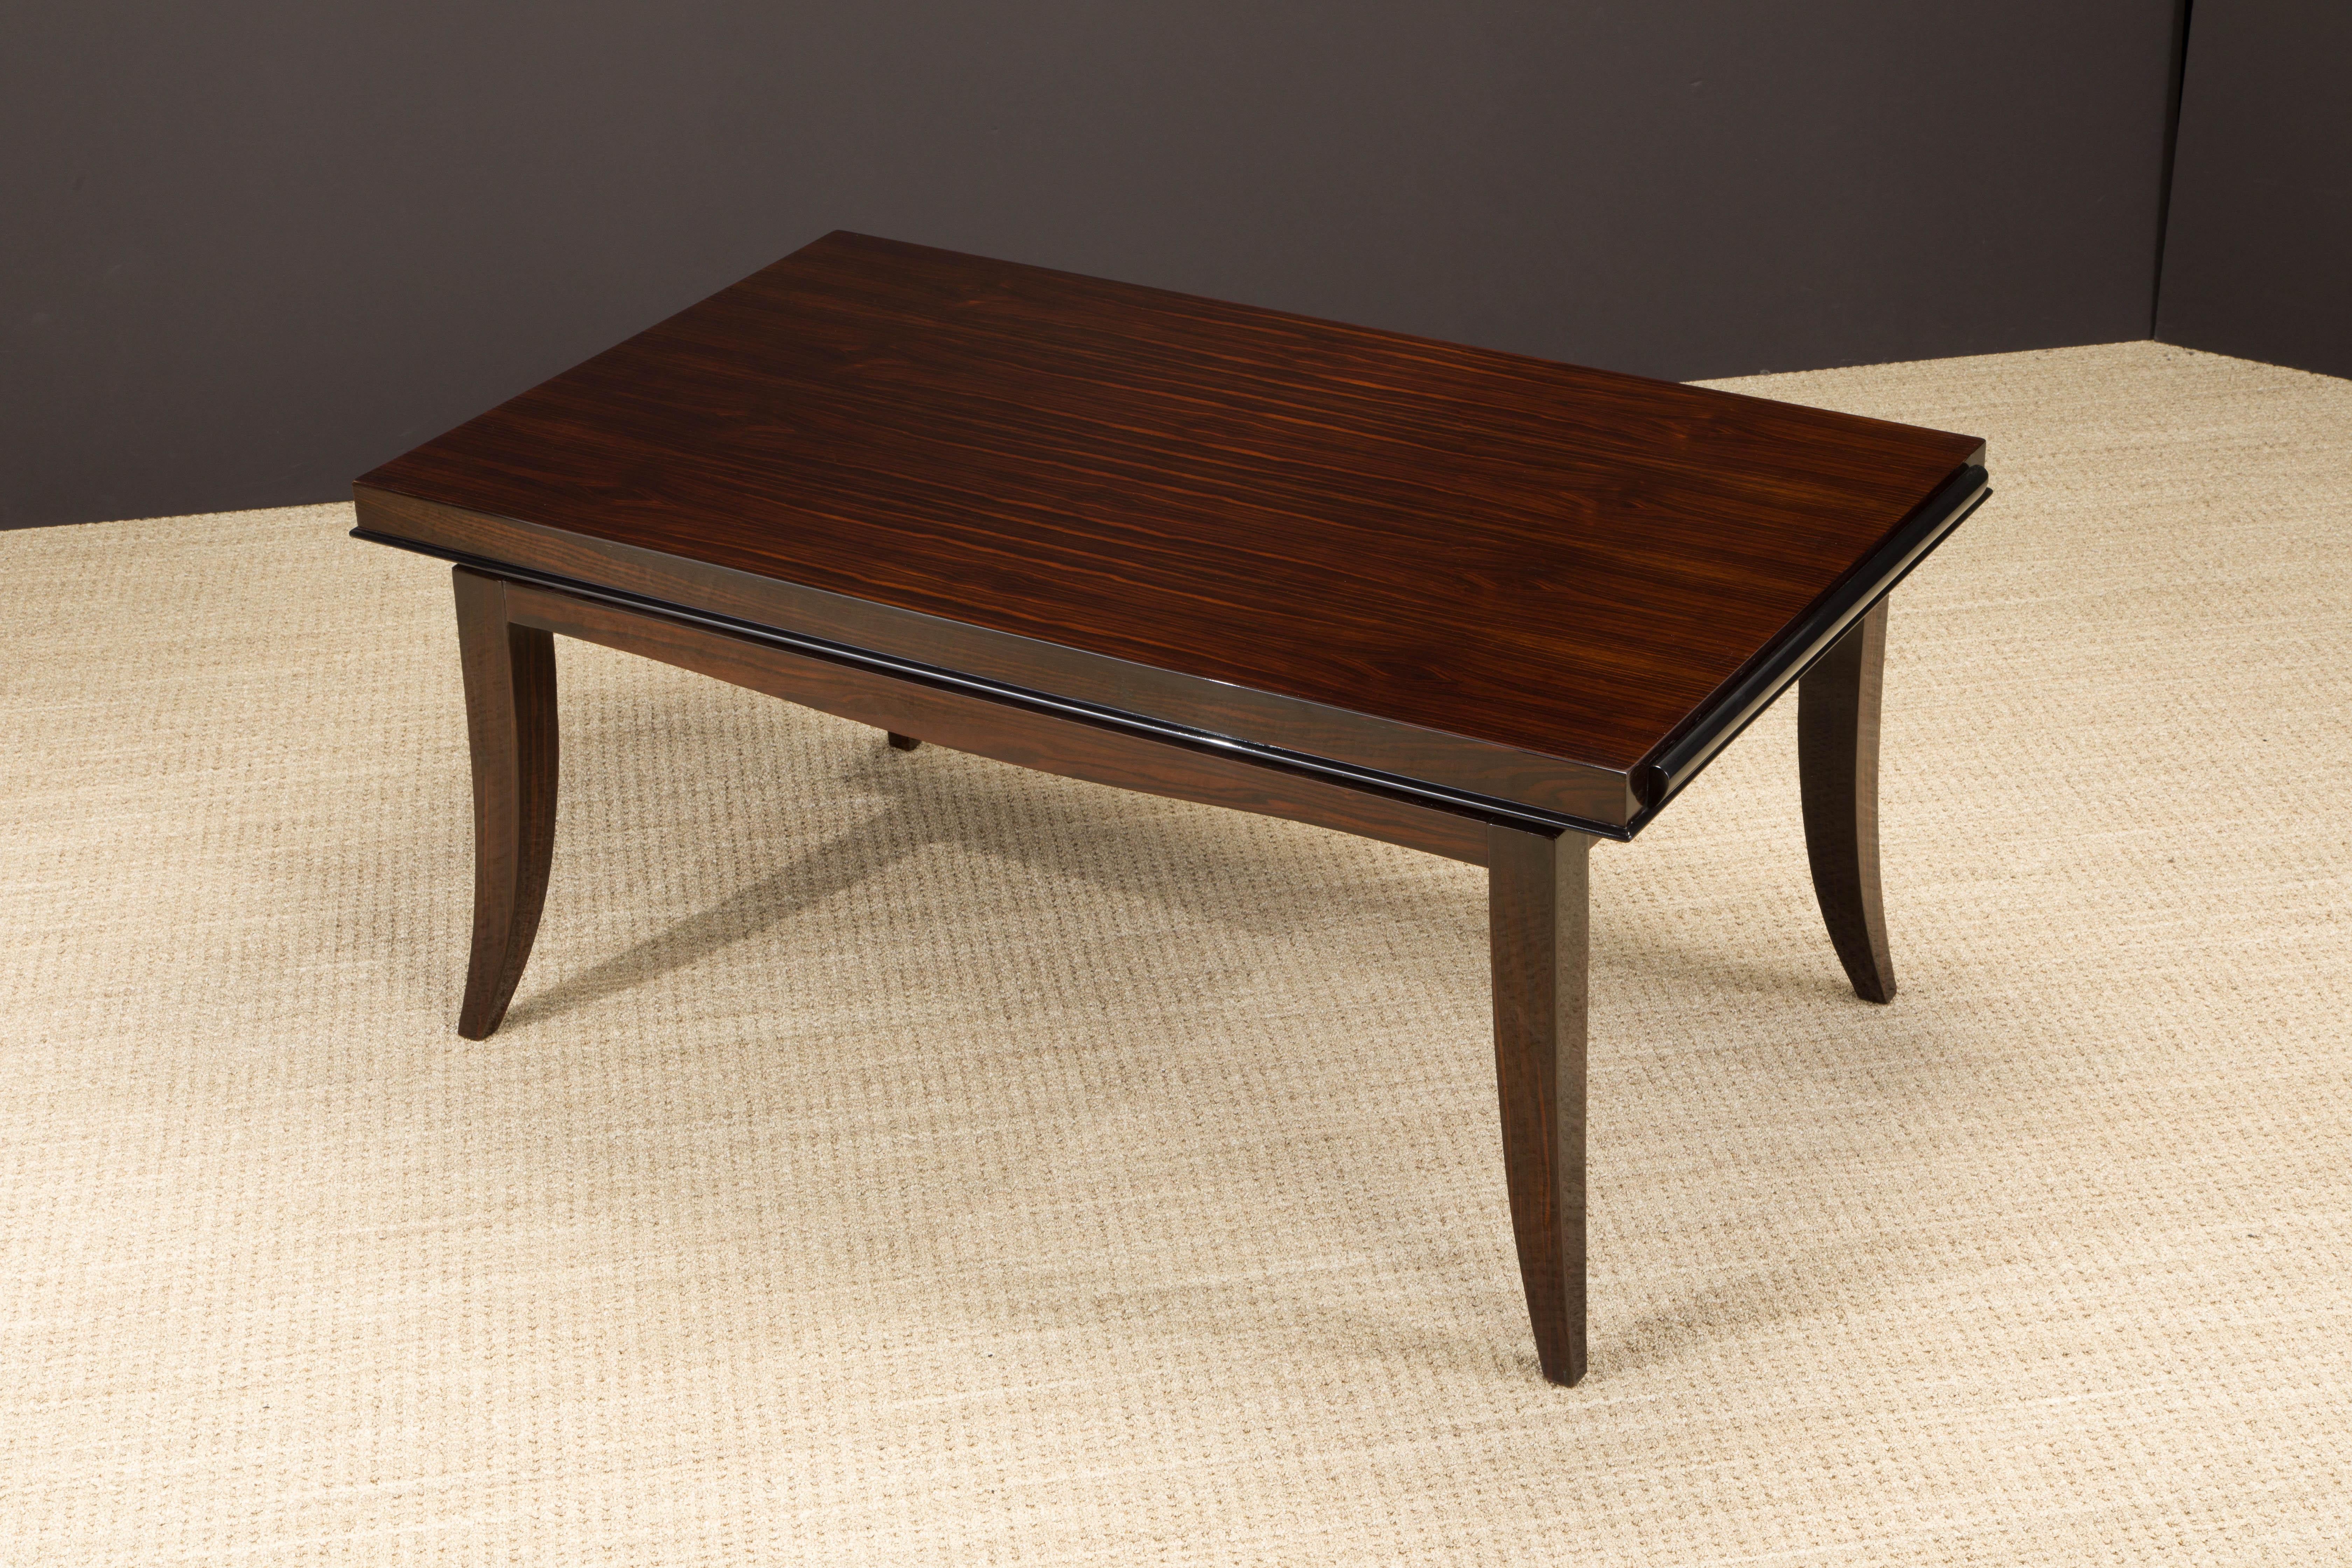 Macassar Ebony French Art Deco Dining Table in the style of Dominique, c. 1940 For Sale 1